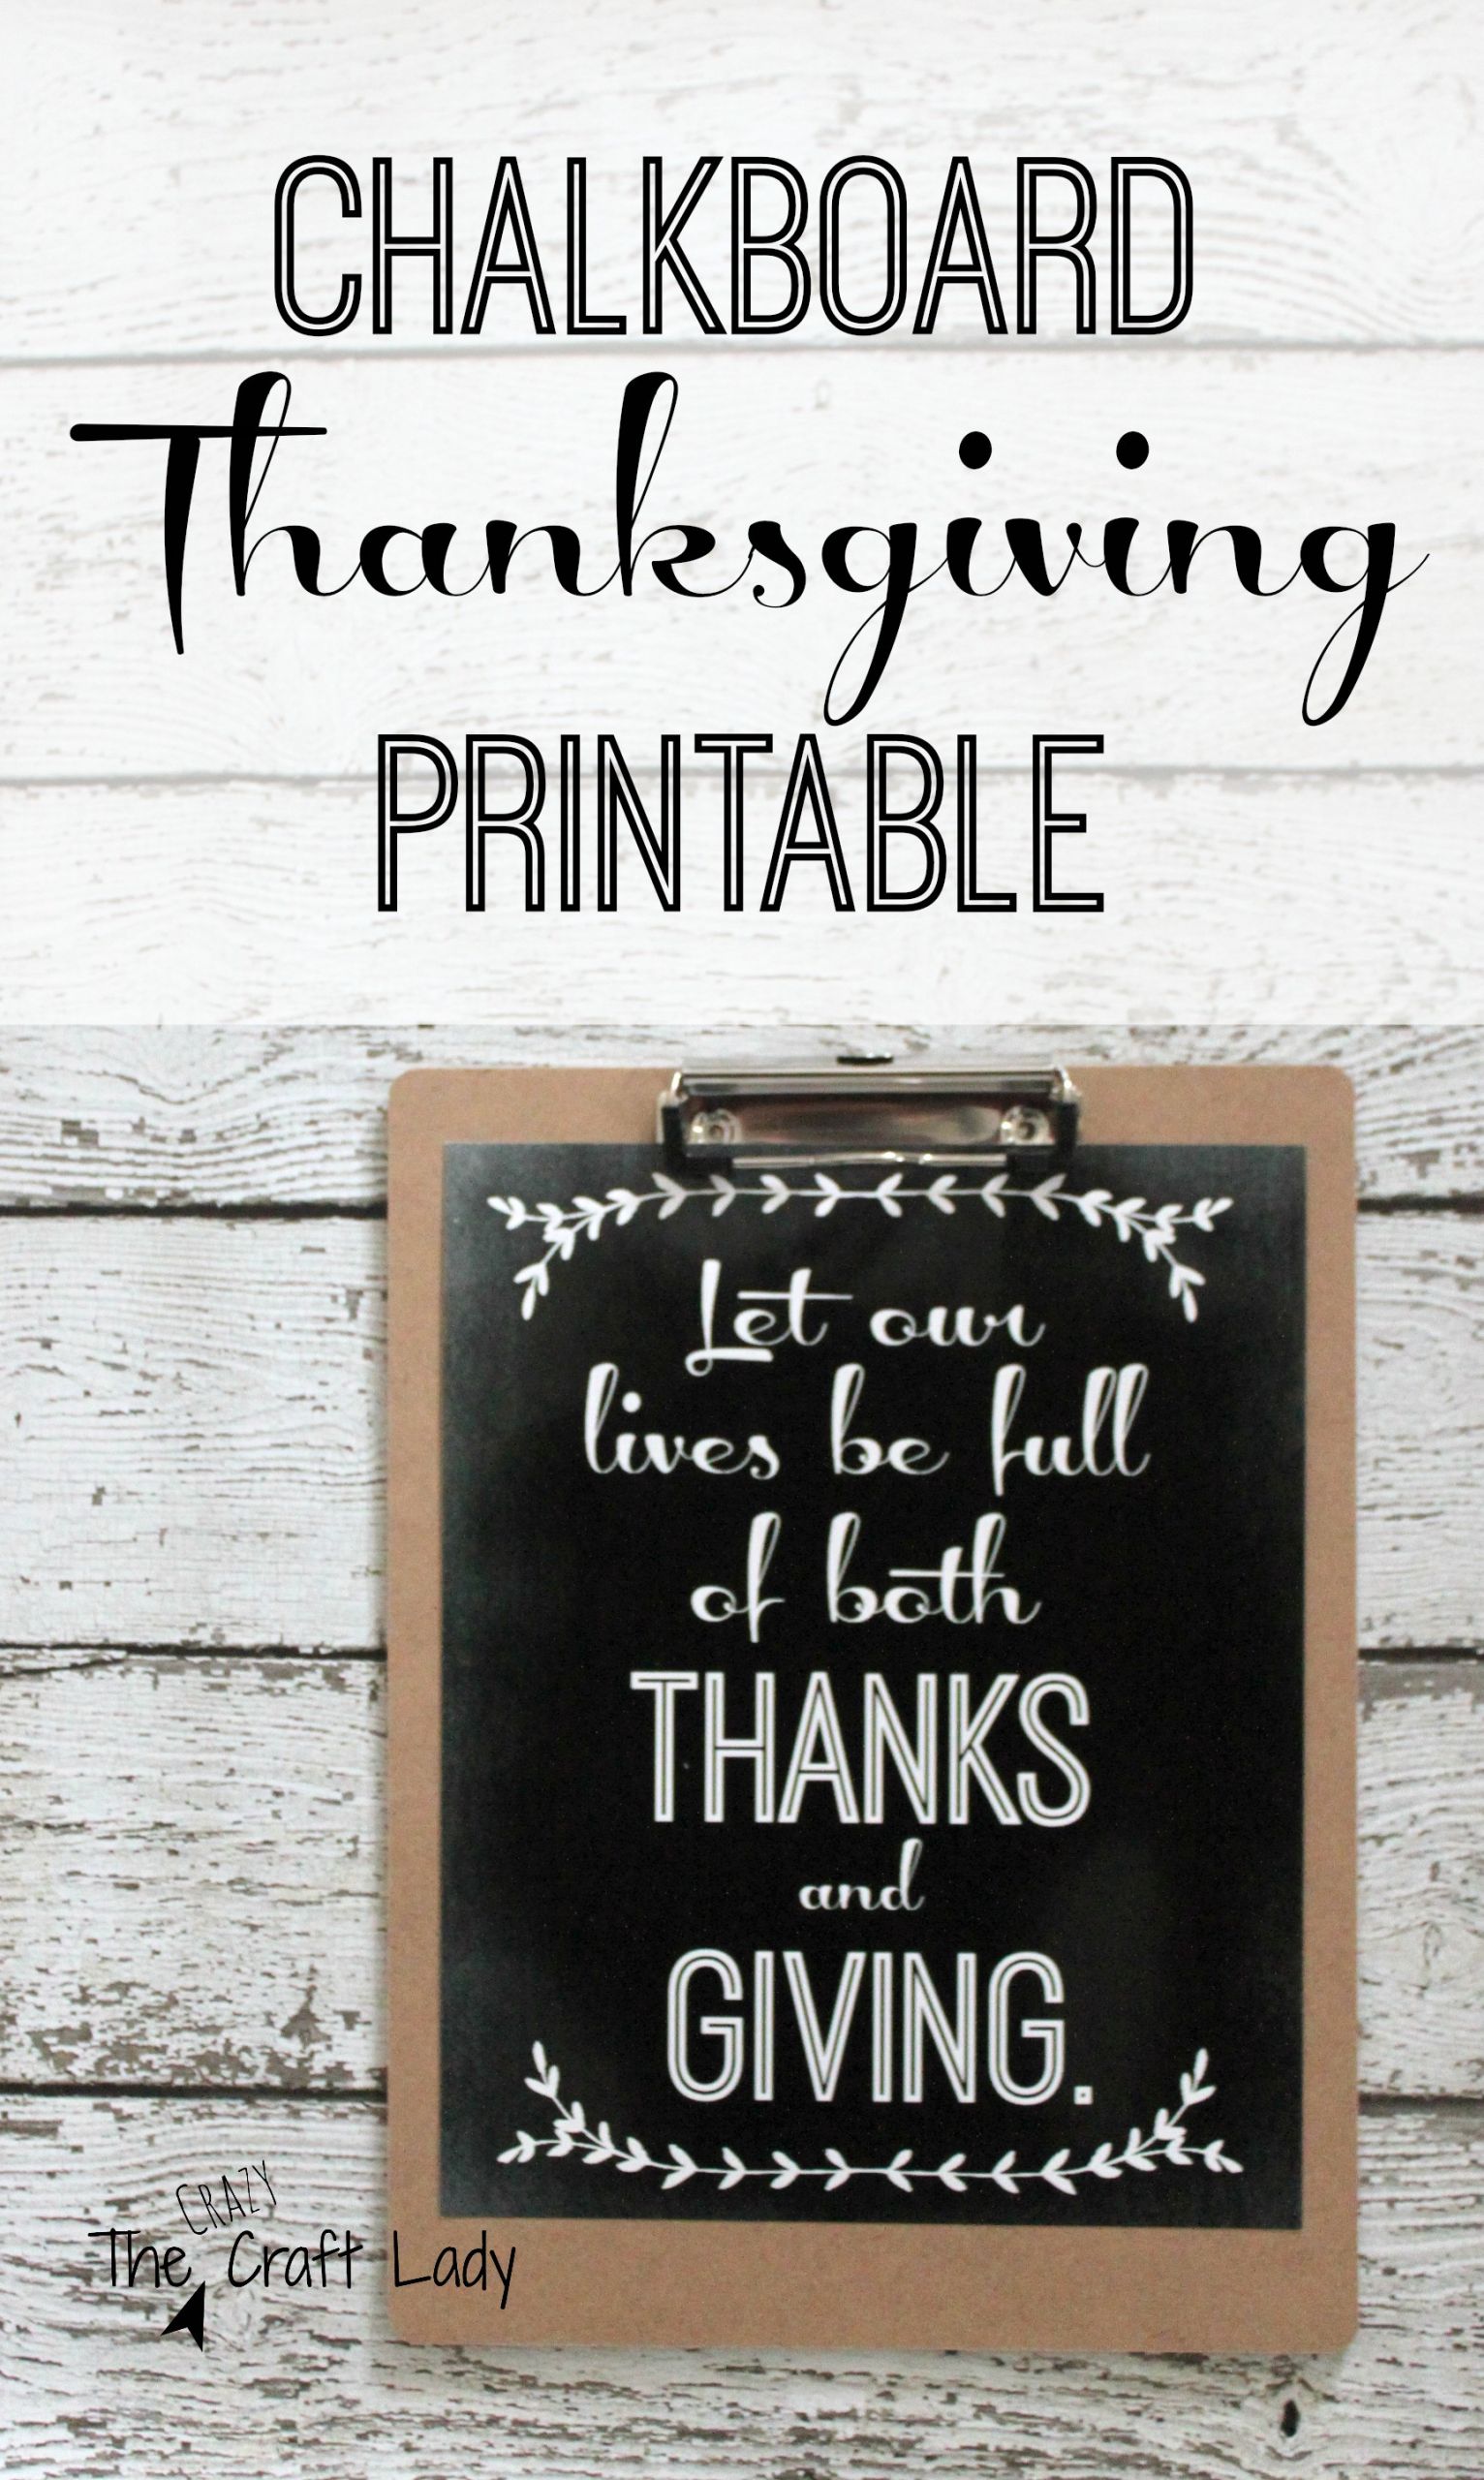 The Office Thanksgiving Quotes
 Two Thanksgiving Chalkboard Printables The Crazy Craft Lady